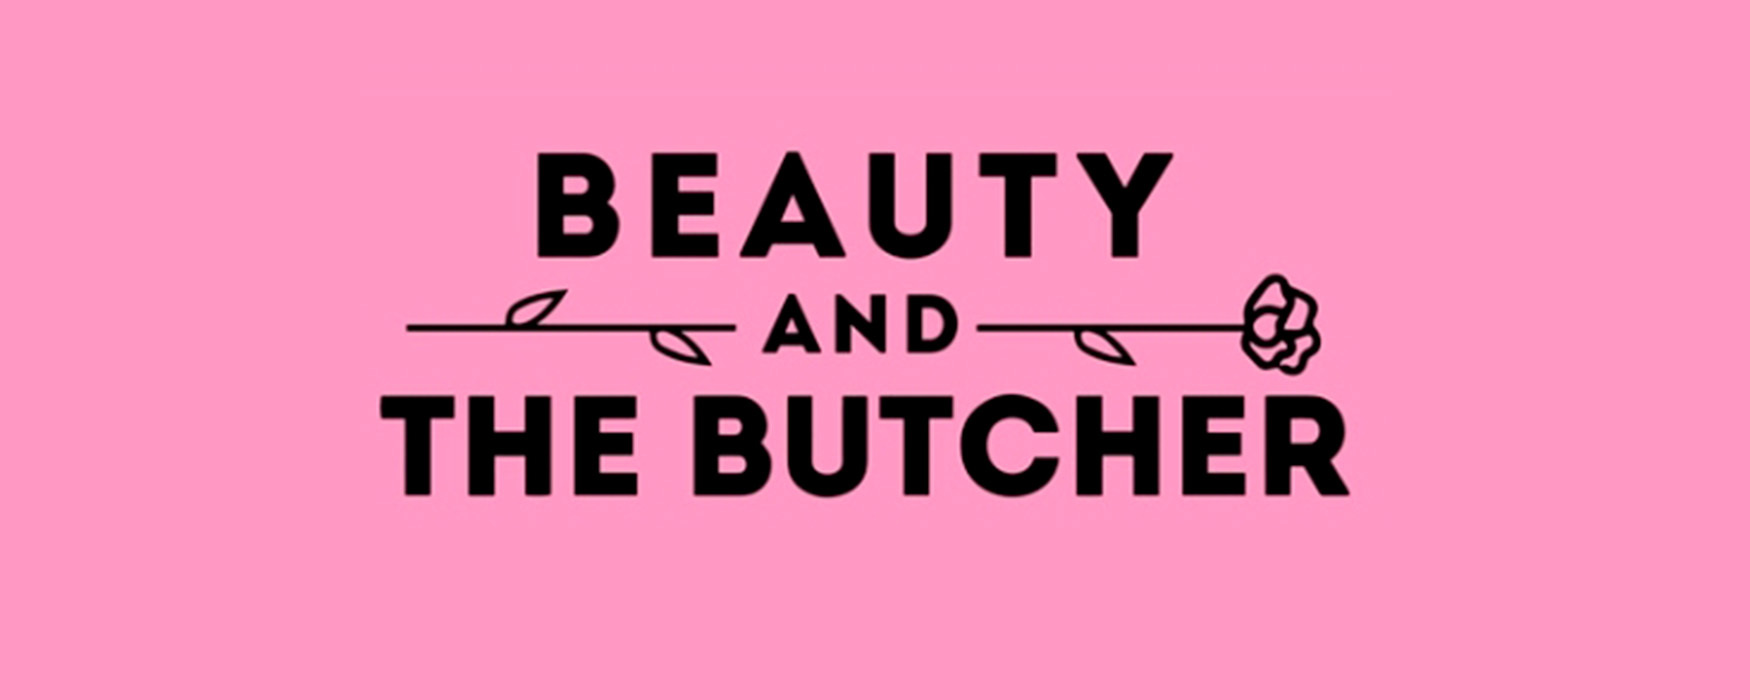 Beauty and The Butcher